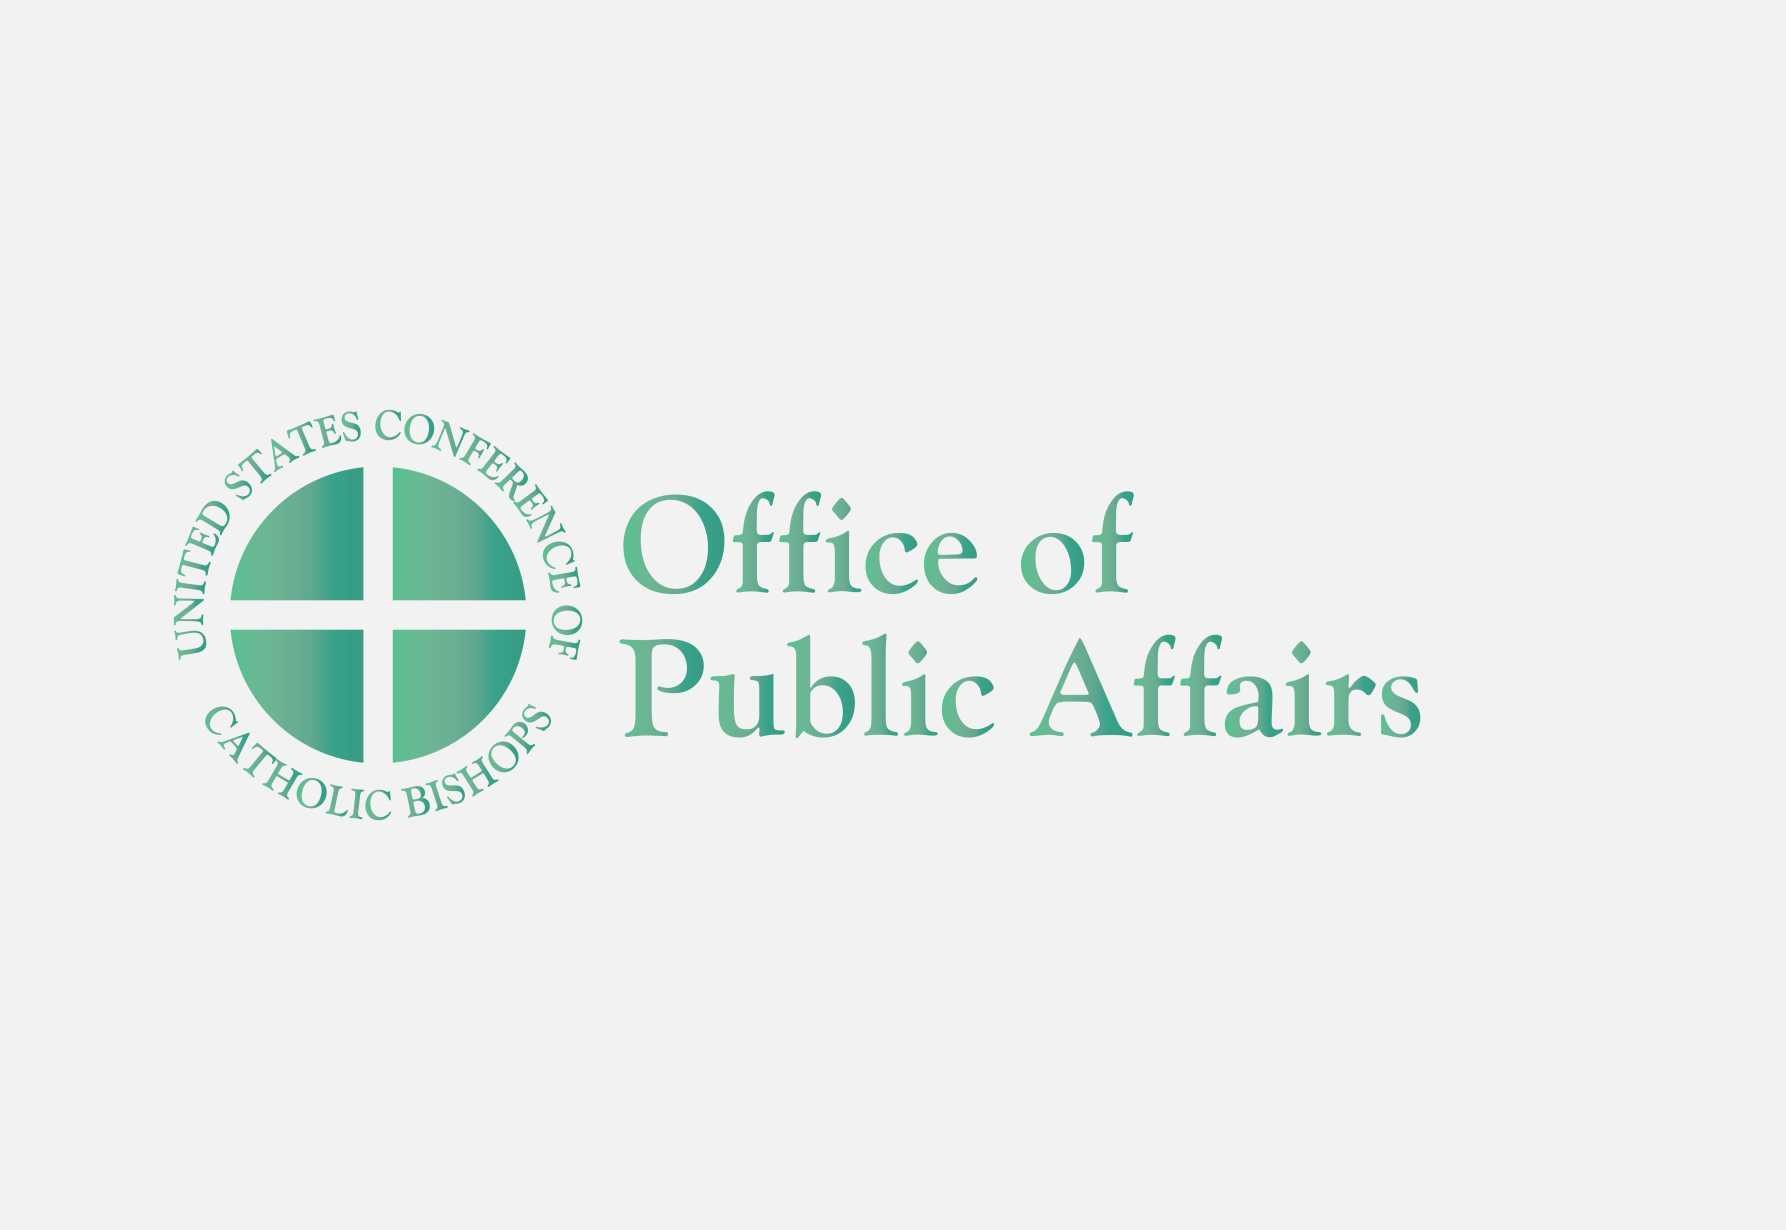 Religious Freedom Week to be Observed June 22-29